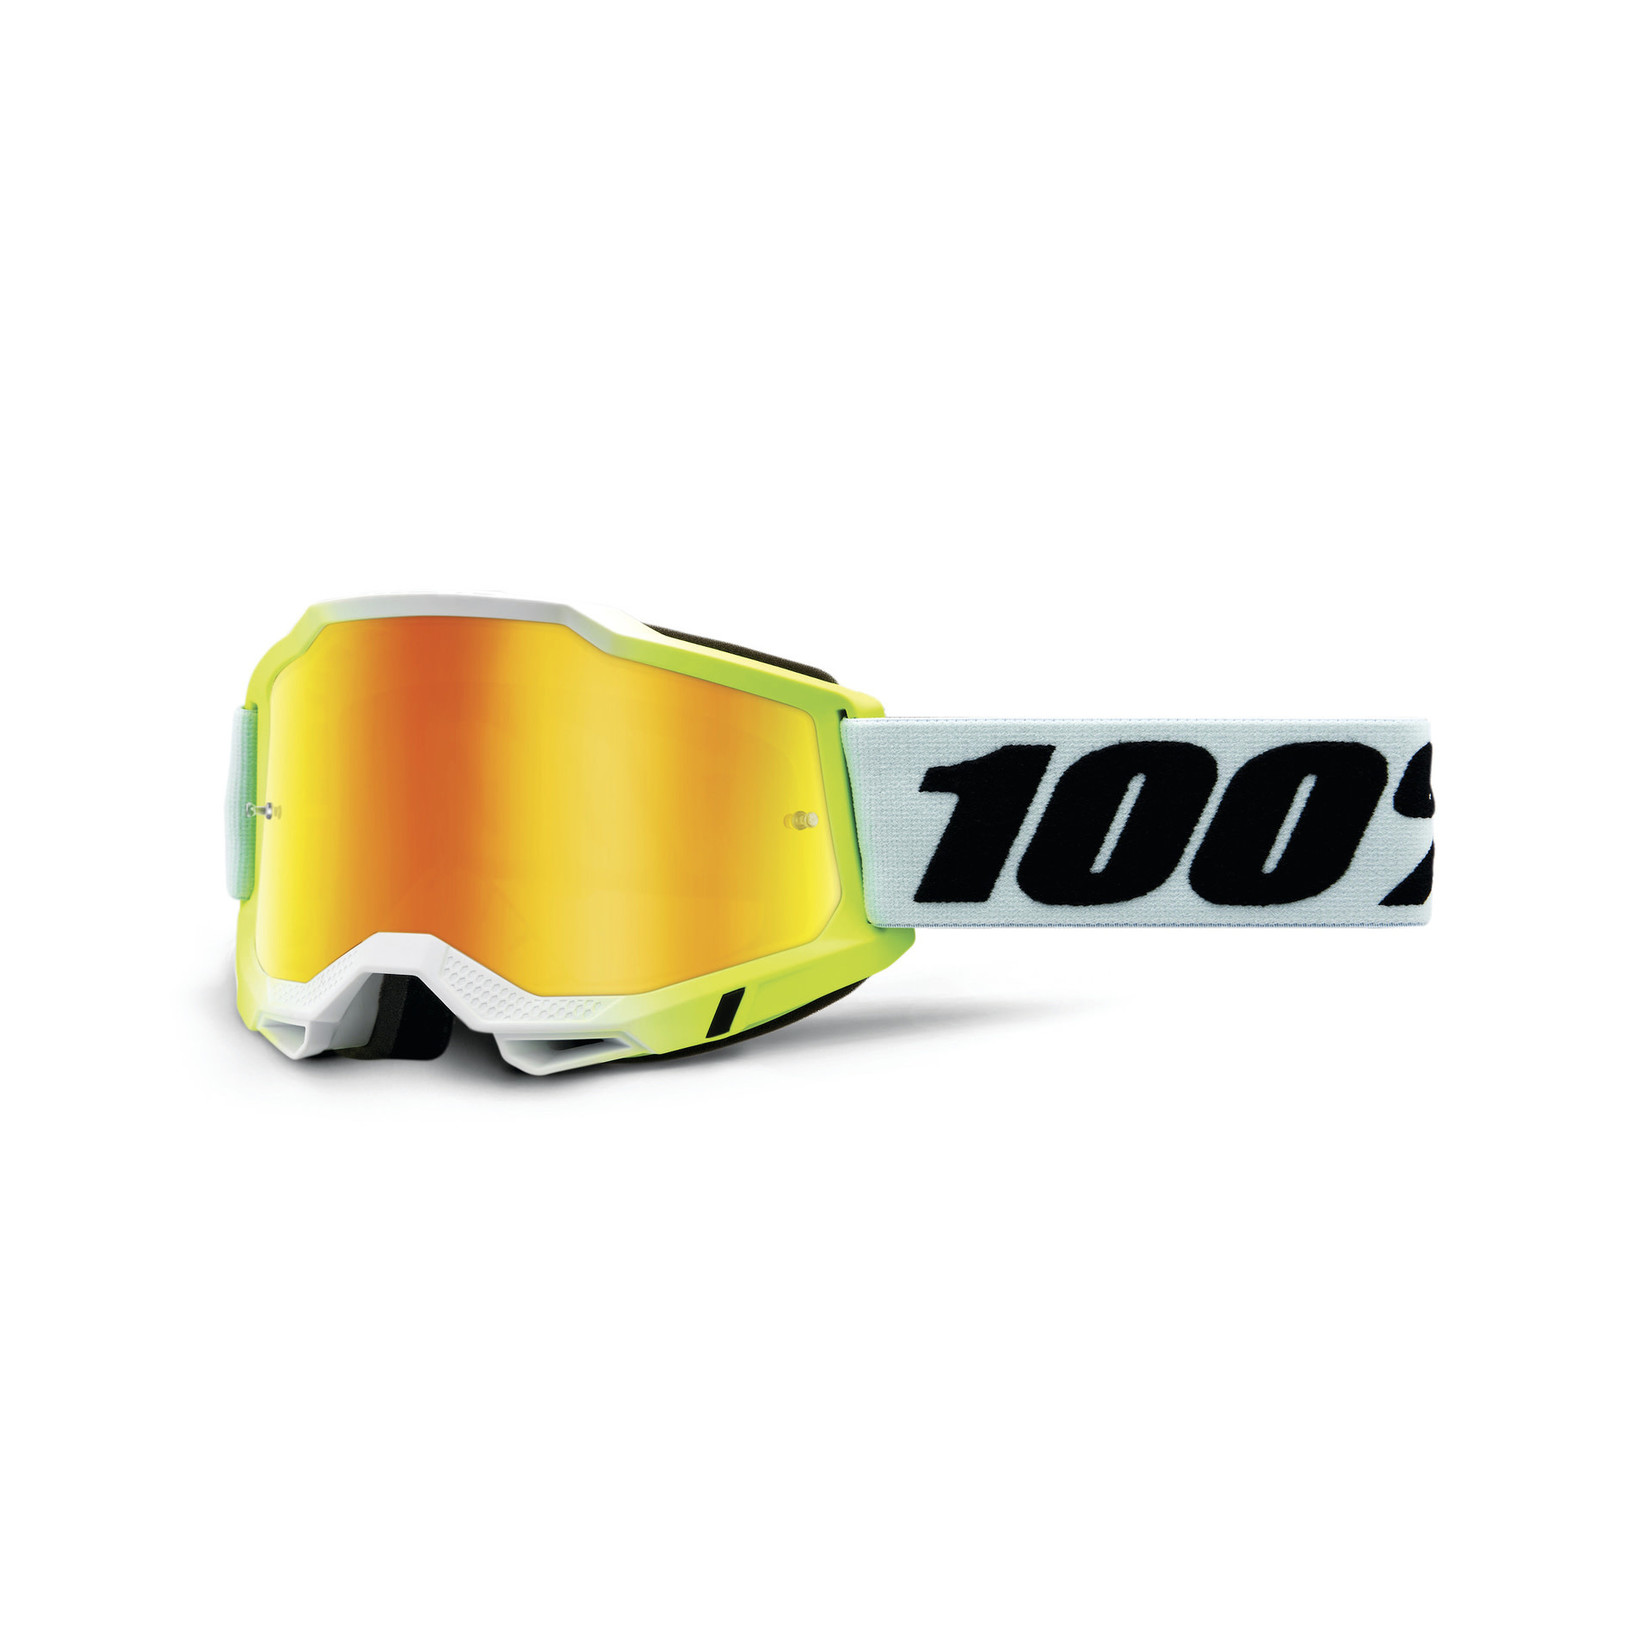 100 Percent 100% Accuri 2 Bike/Cycling Goggle - Dunder - Smoke Polycarbonate Lens